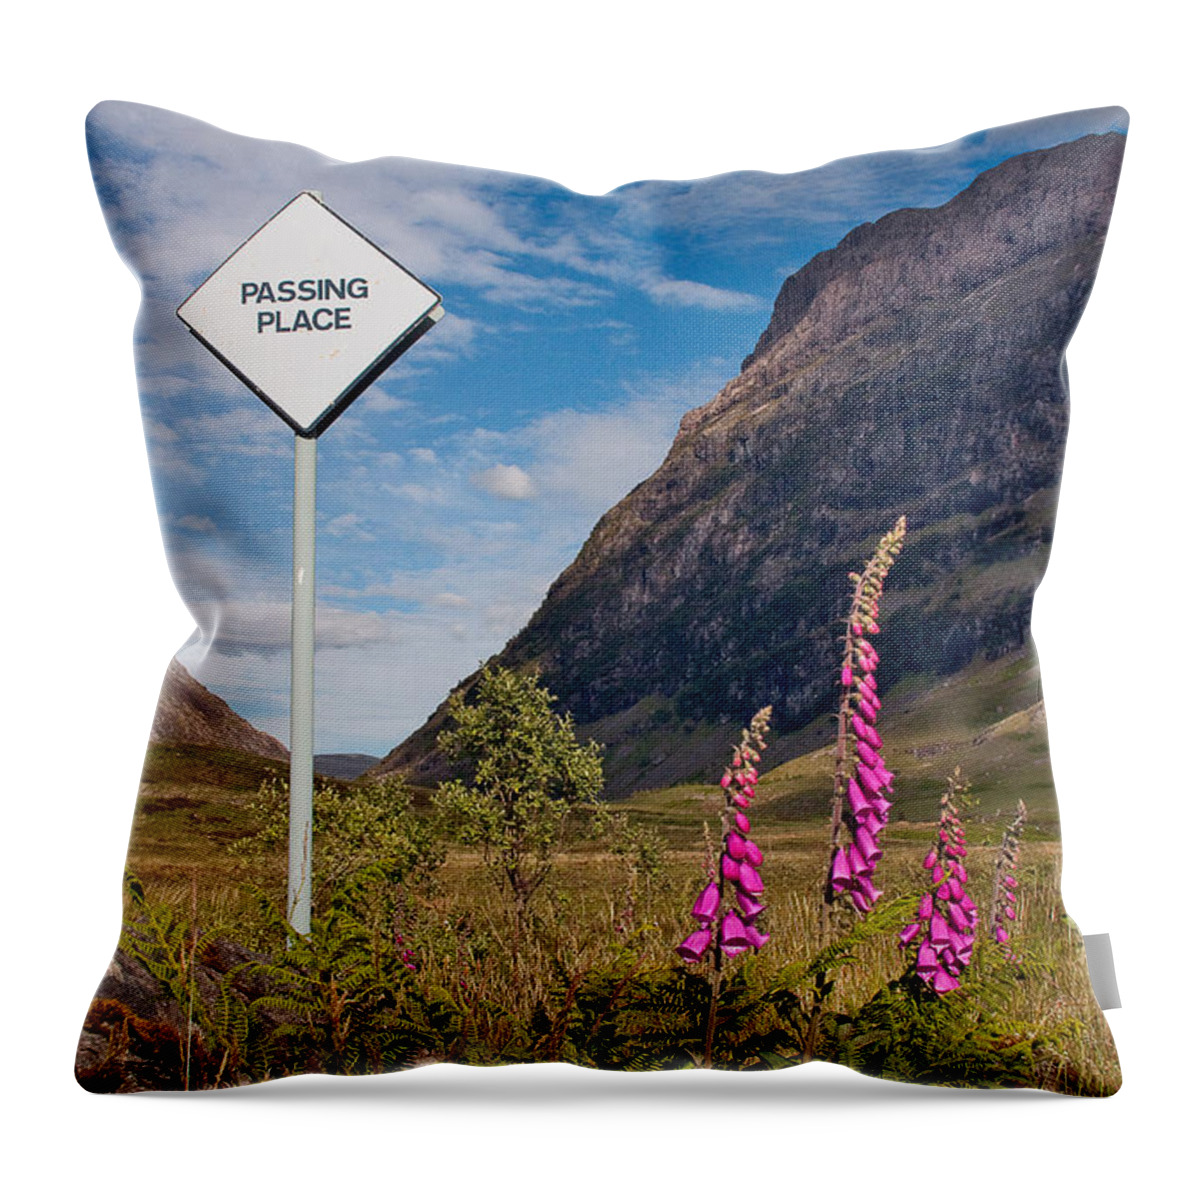 Scotland Throw Pillow featuring the photograph Passing Place by Colette Panaioti